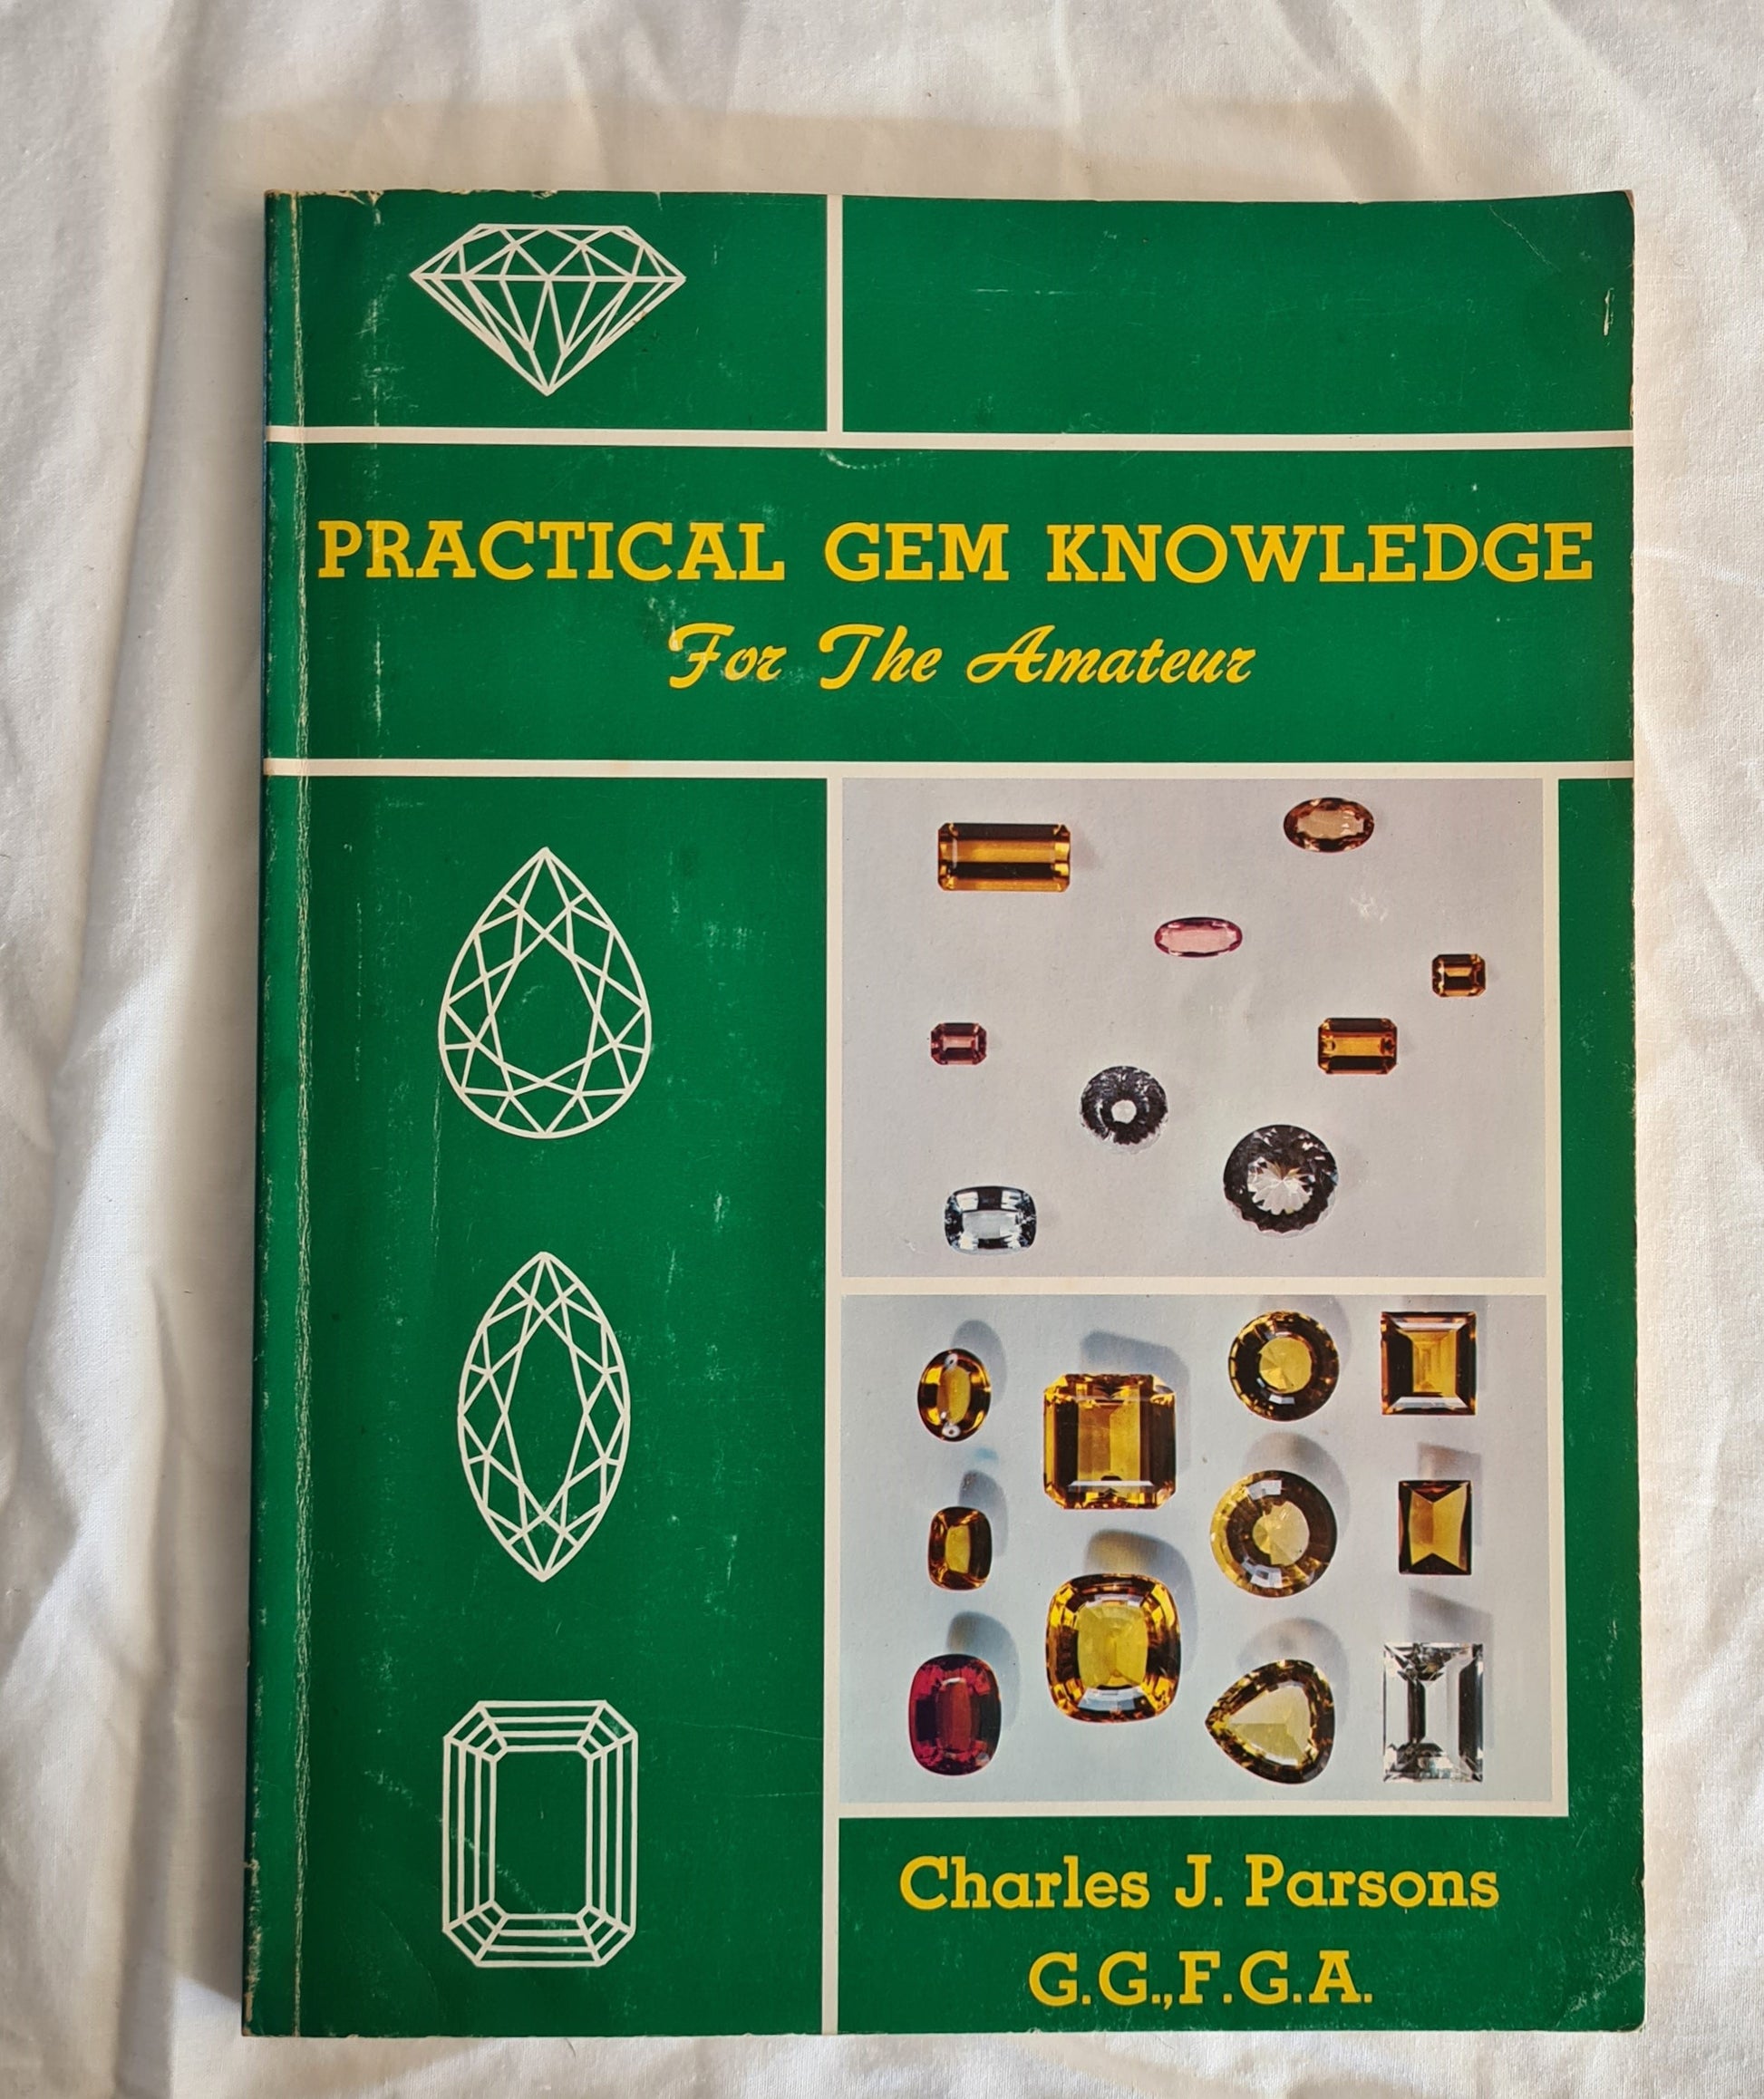 Practical Gem Knowledge for the Amateur  by Charles J. Parsons  Compiled and edited by Pansy D. Kraus